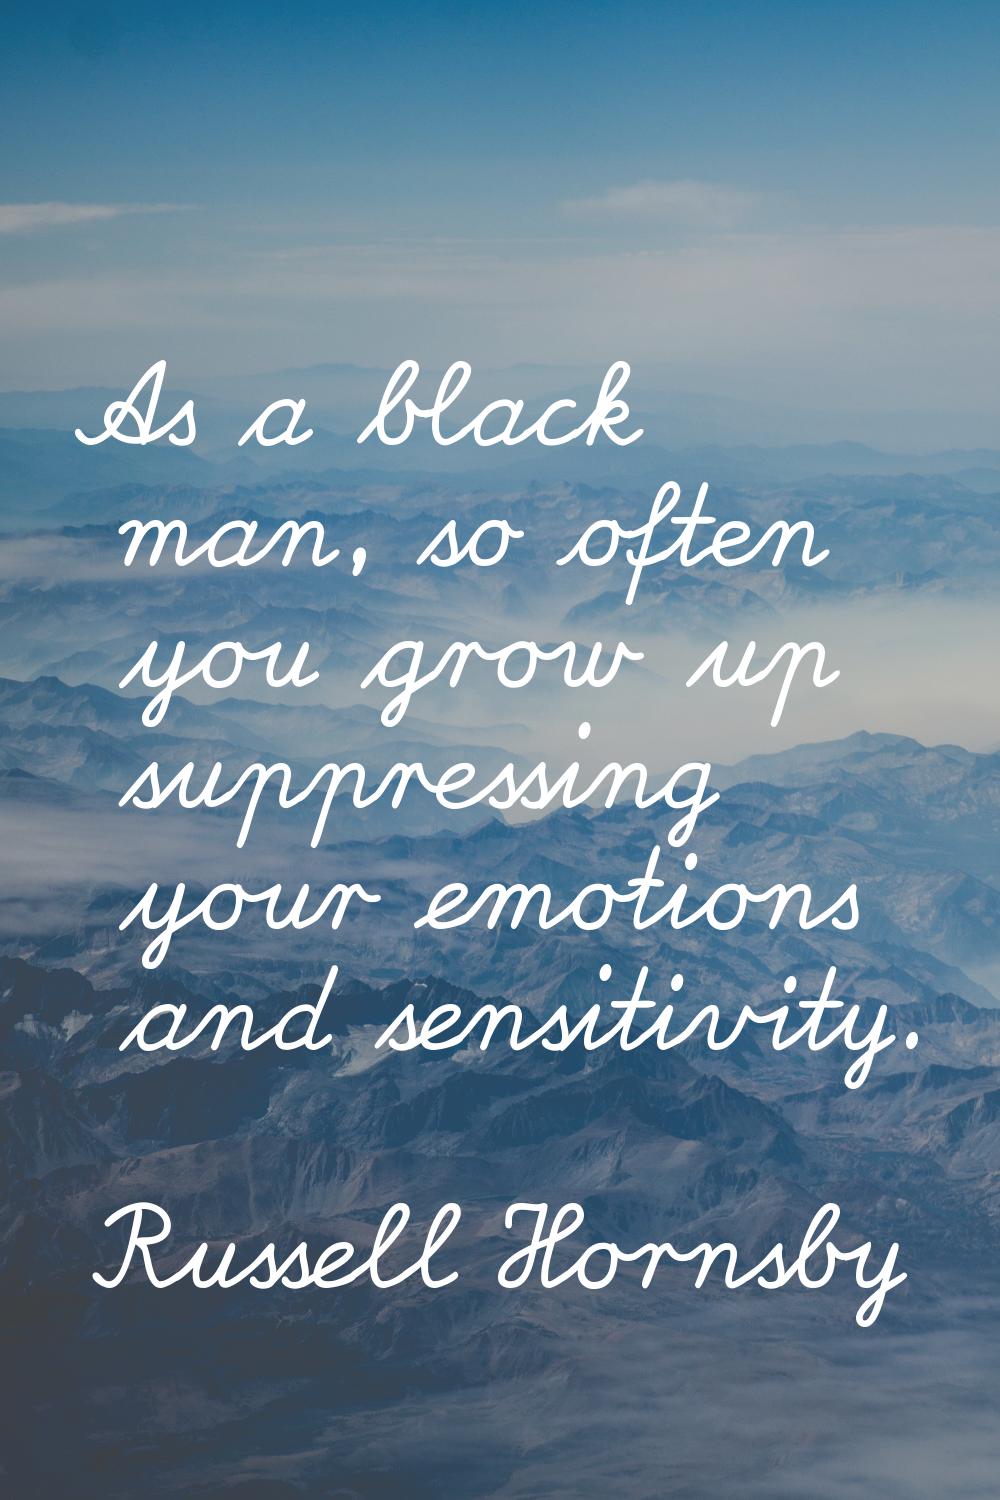 As a black man, so often you grow up suppressing your emotions and sensitivity.